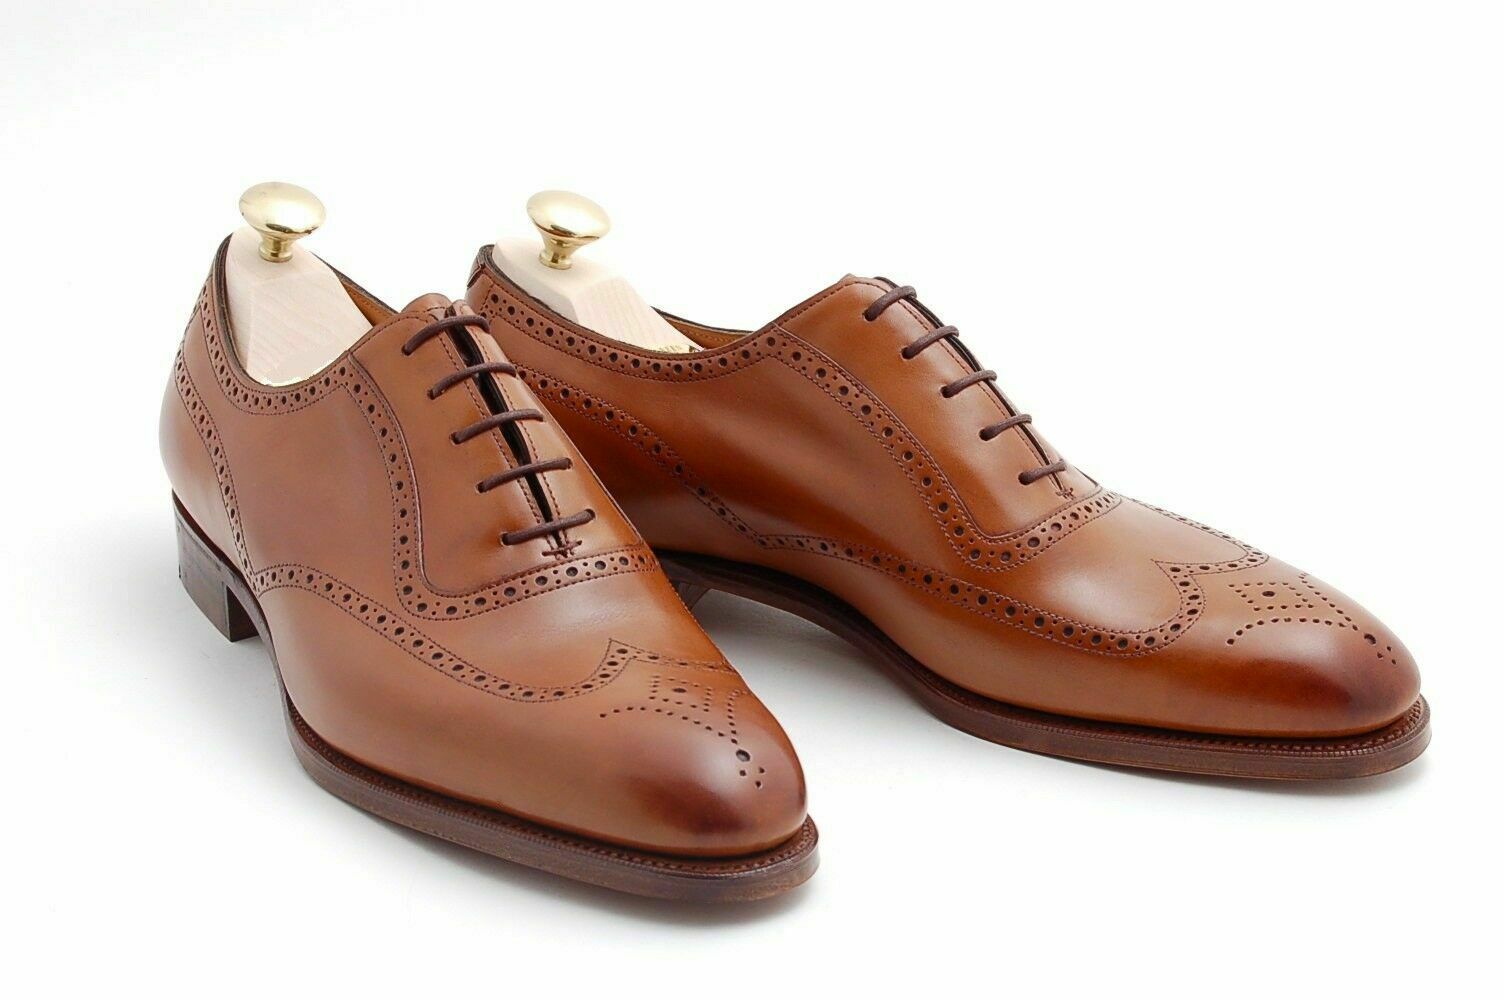 Brown Oxford Brouging Lace Up Premium Quality Men's Leather Formal Dress Shoes - $149.99 - $209.99